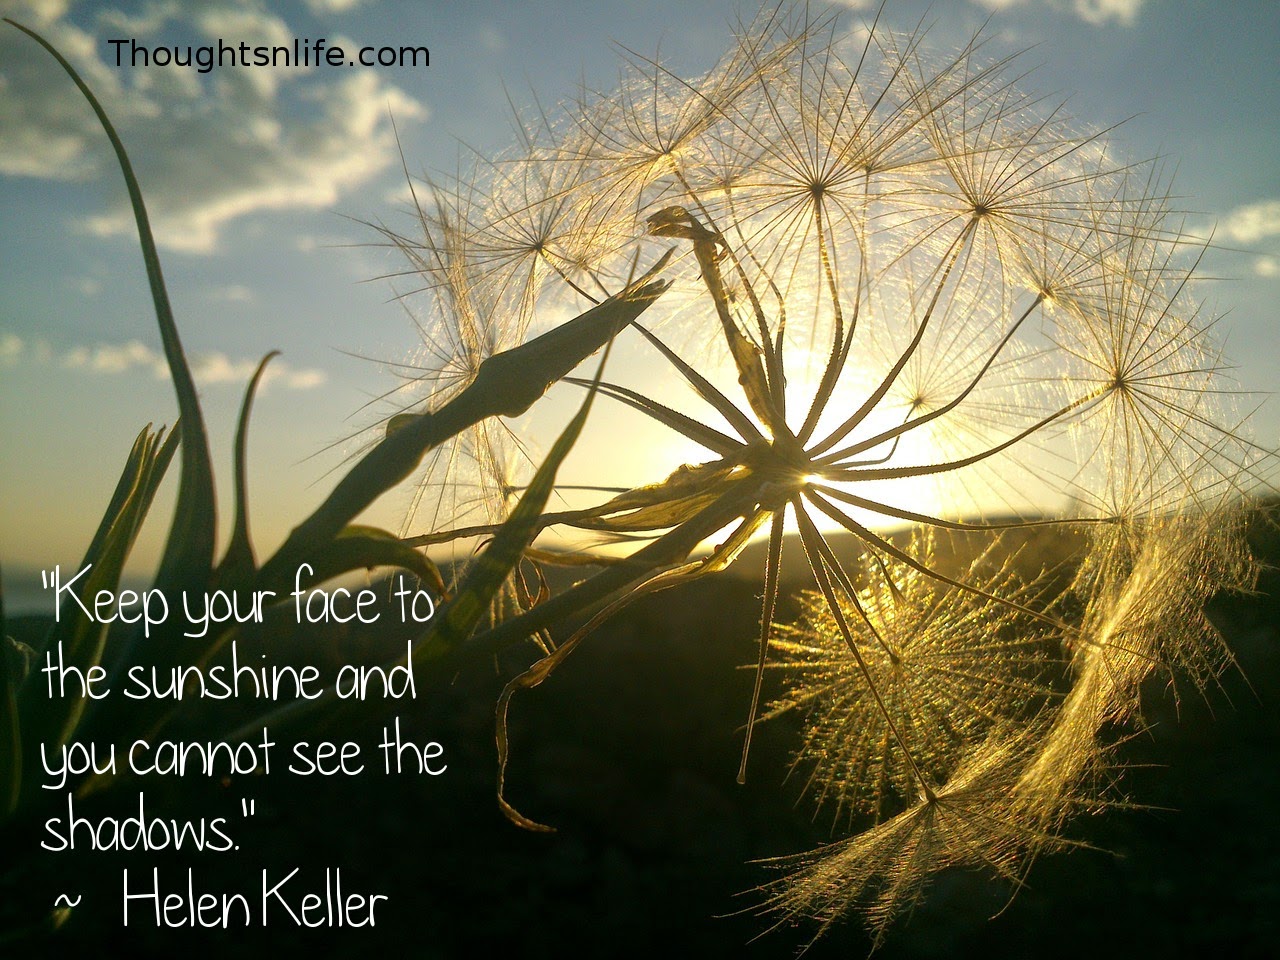 Thoughtsnlife.com: "Keep your face to the sunshine and you cannot see the shadows."   ~   Helen Keller